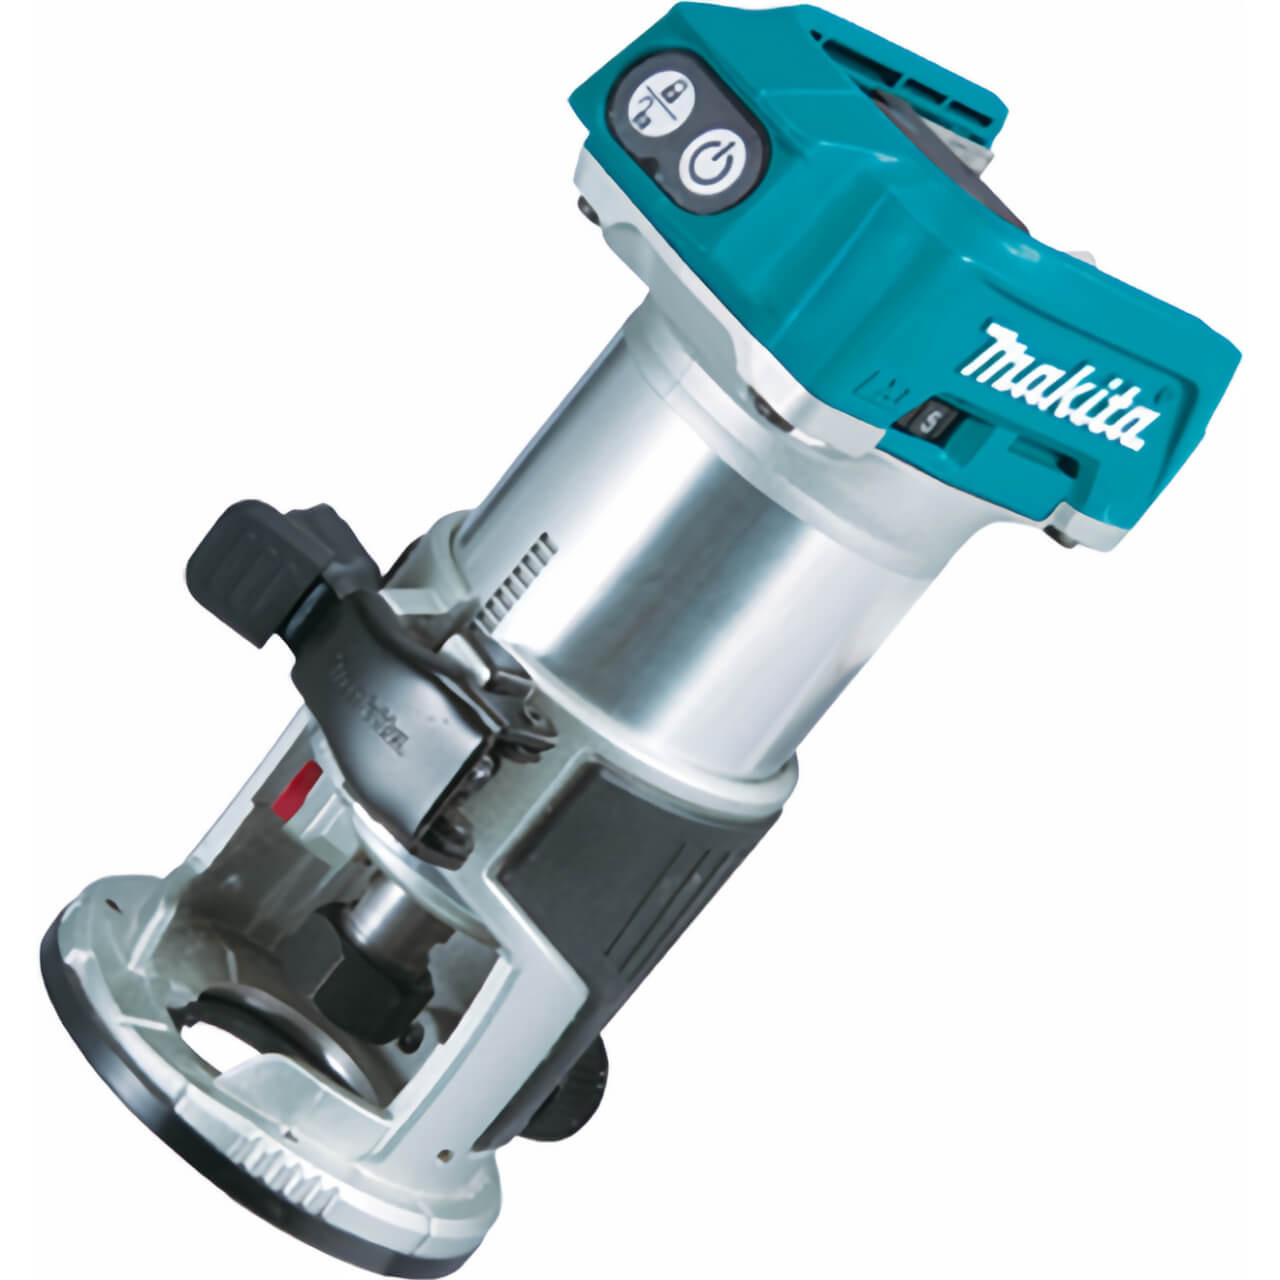 Makita 18V BRUSHLESS Laminate Trimmer Kit - Includes 2 x 5.0Ah Batteries. Rapid Charger & MakPac Case